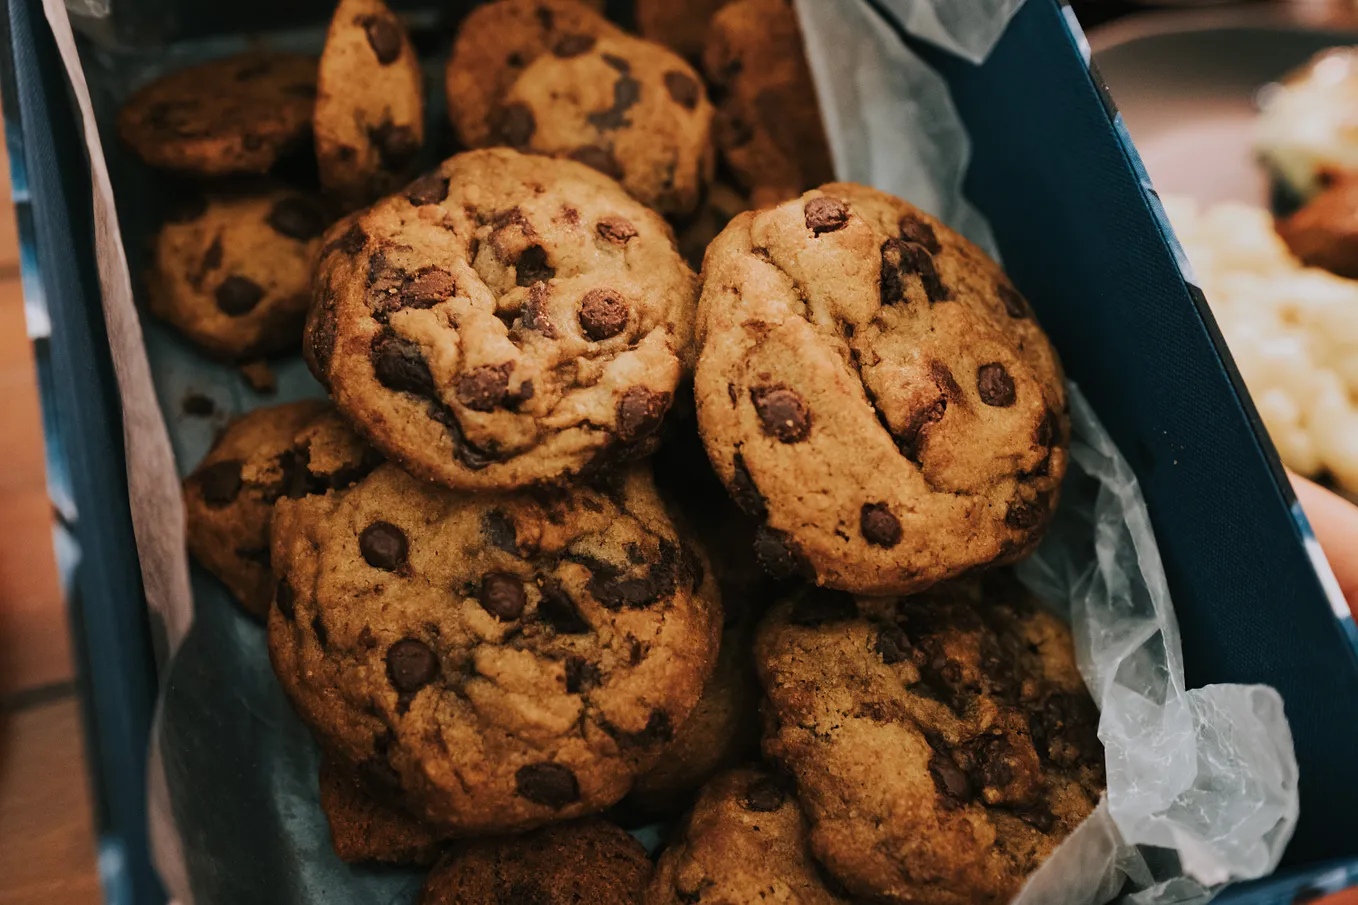 What makes a chocolate chip cookie good?